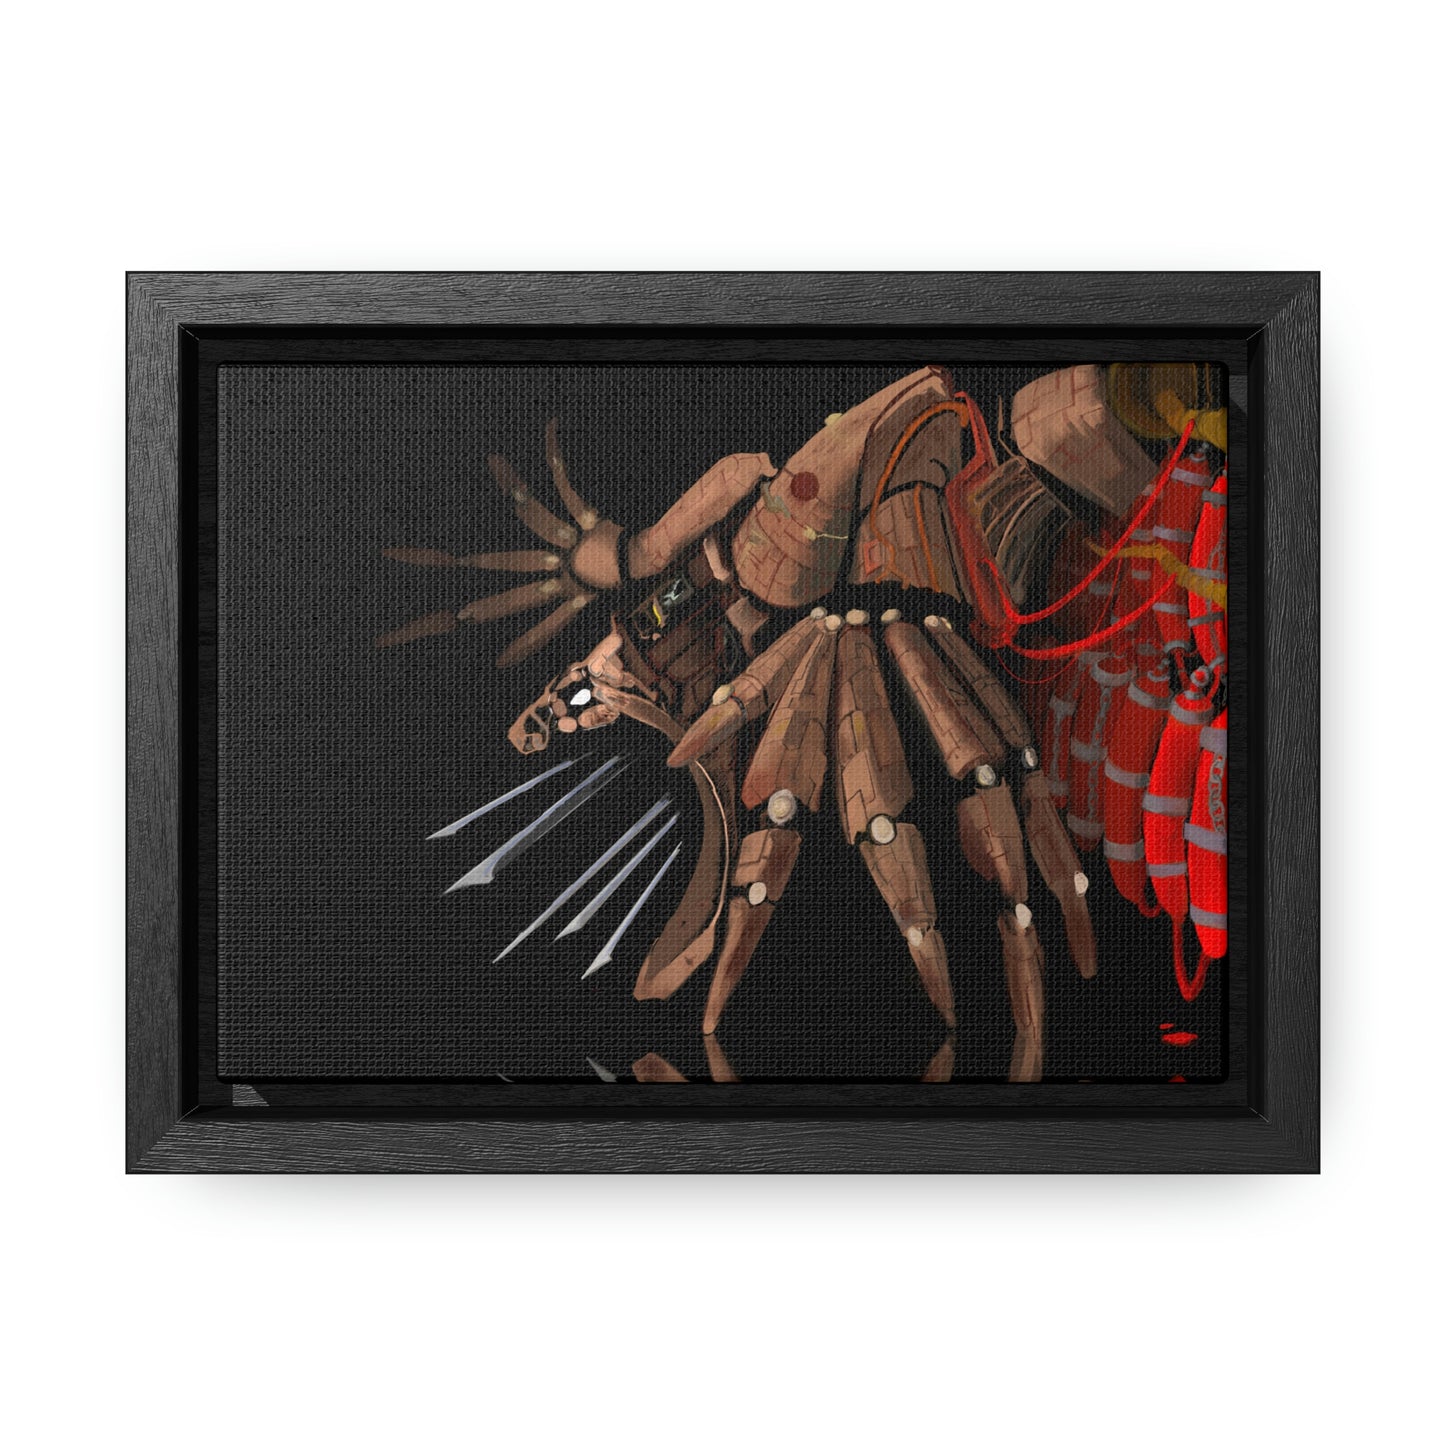 Phlebotomite Gallery Canvas Wrap in Horizontal Frame